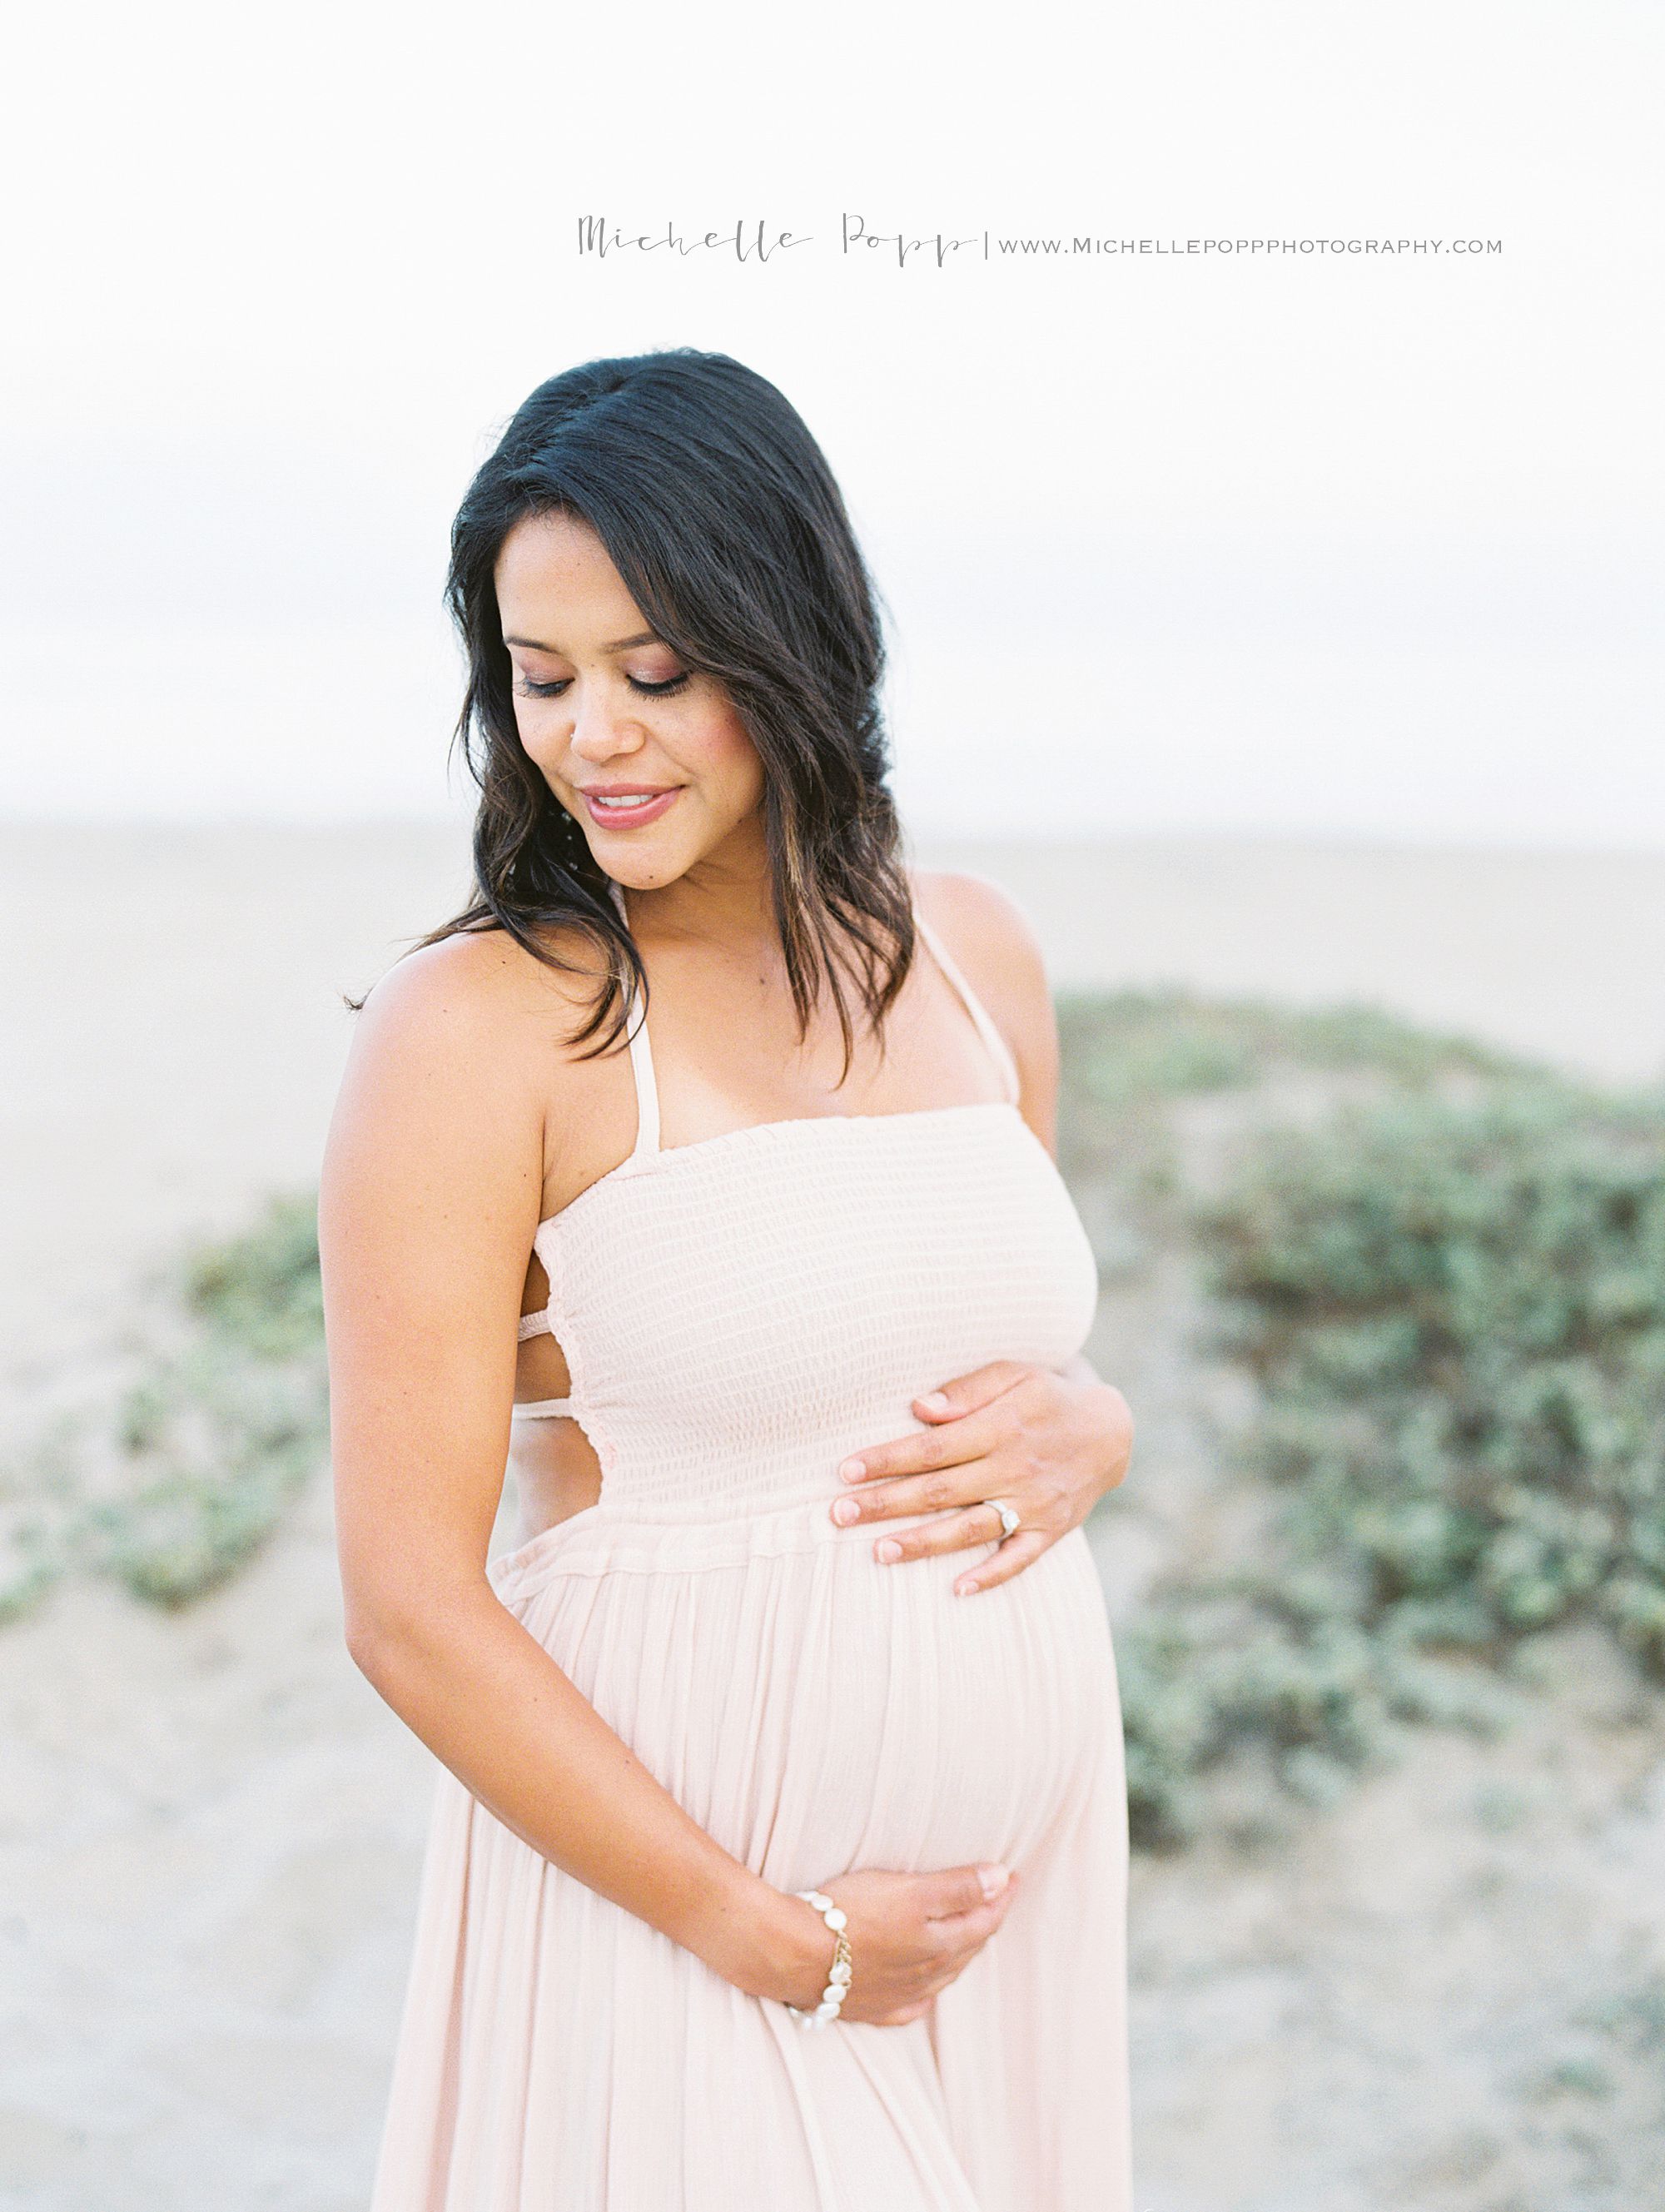 Spring Maternity Photos with Michelle Popp Photography